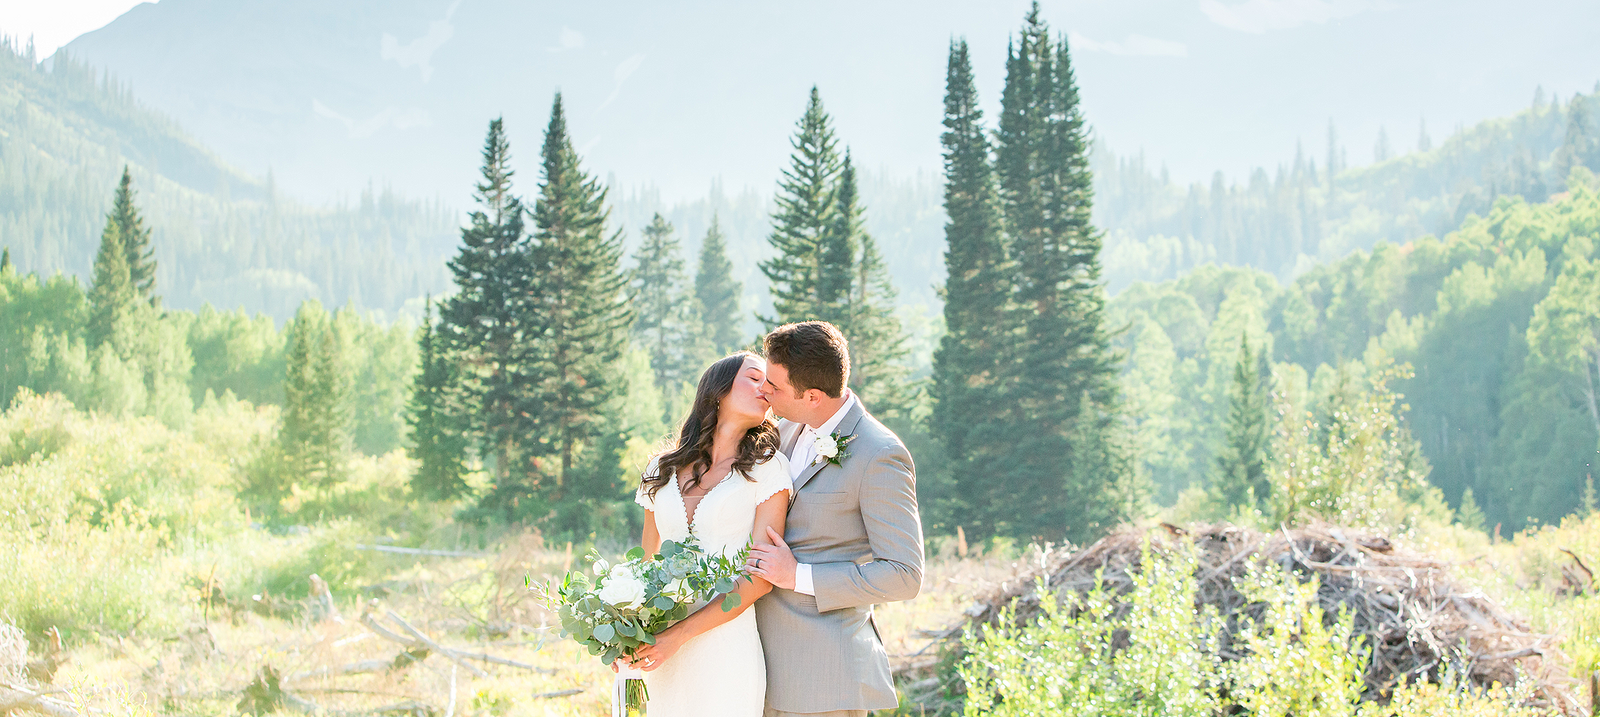 Elopement photographer Denver with Rachel and Rob